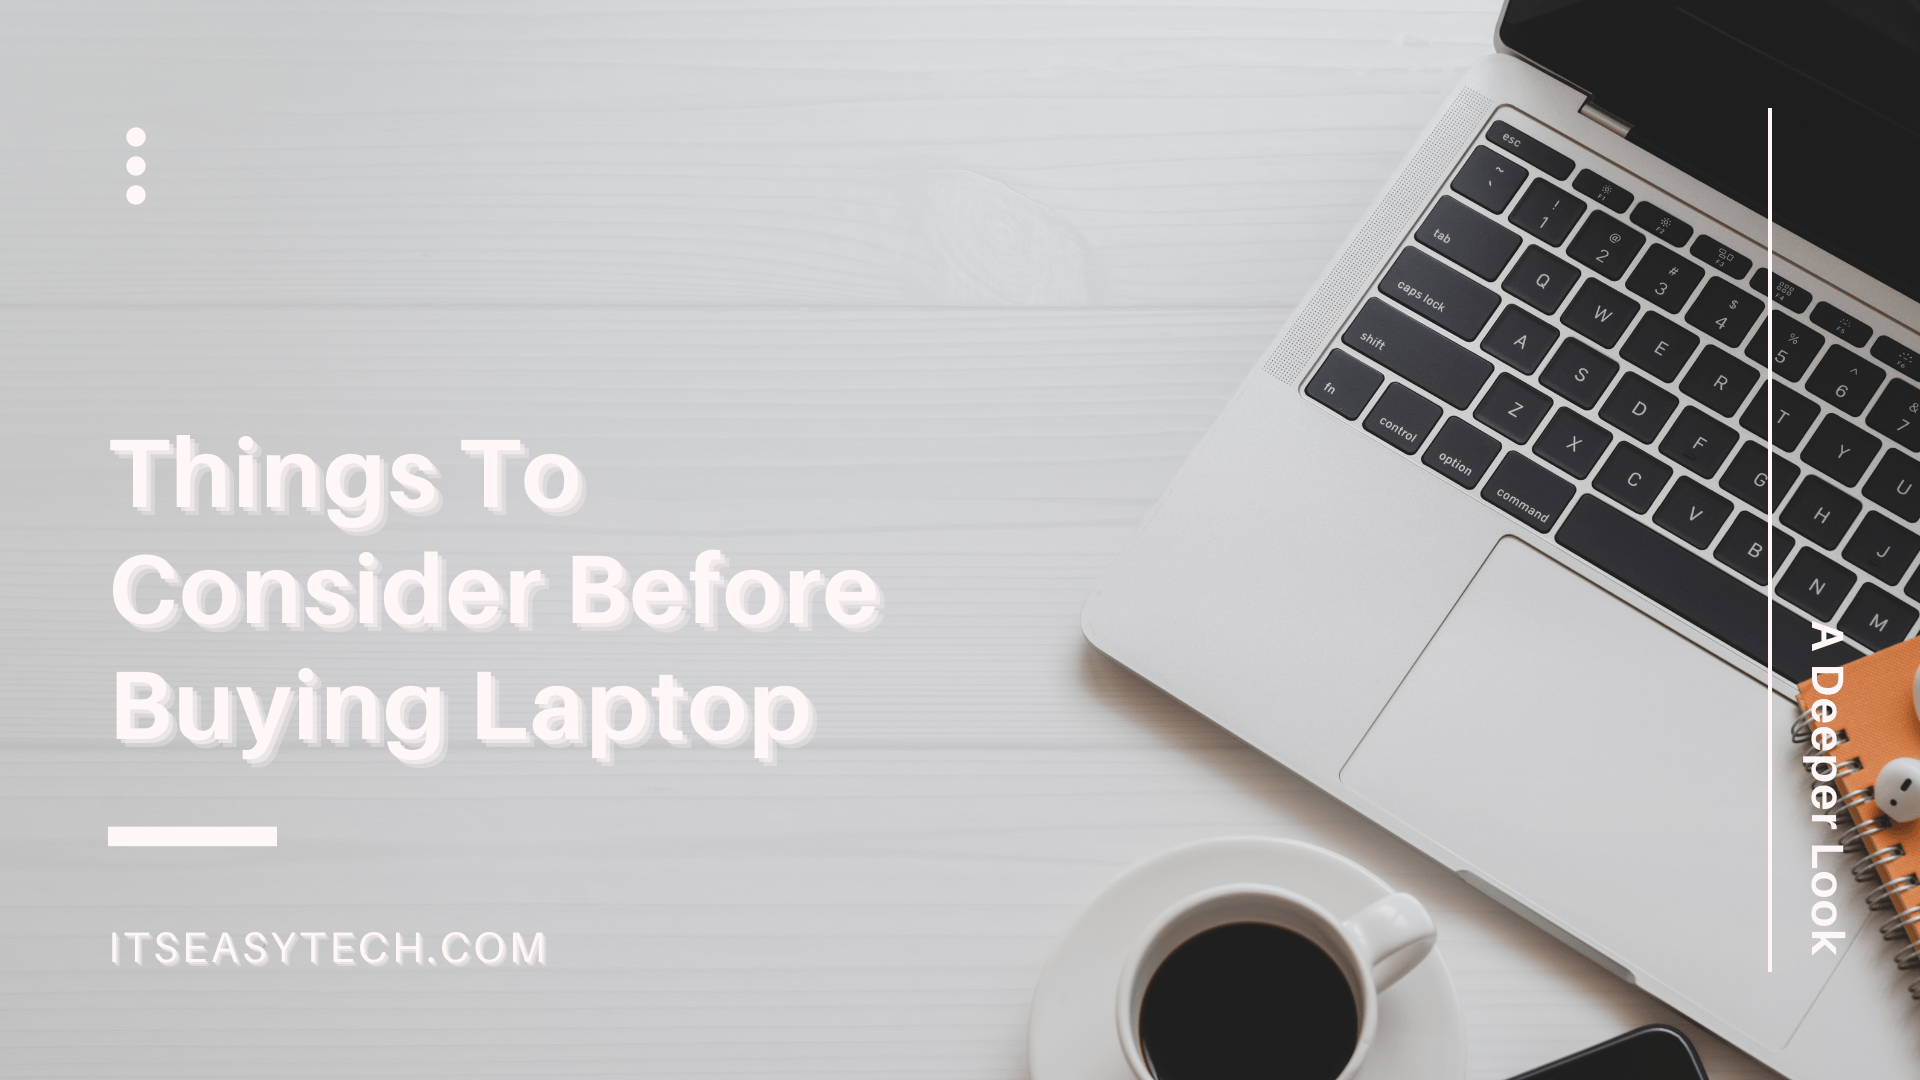 Things To Consider Before Buying Laptop